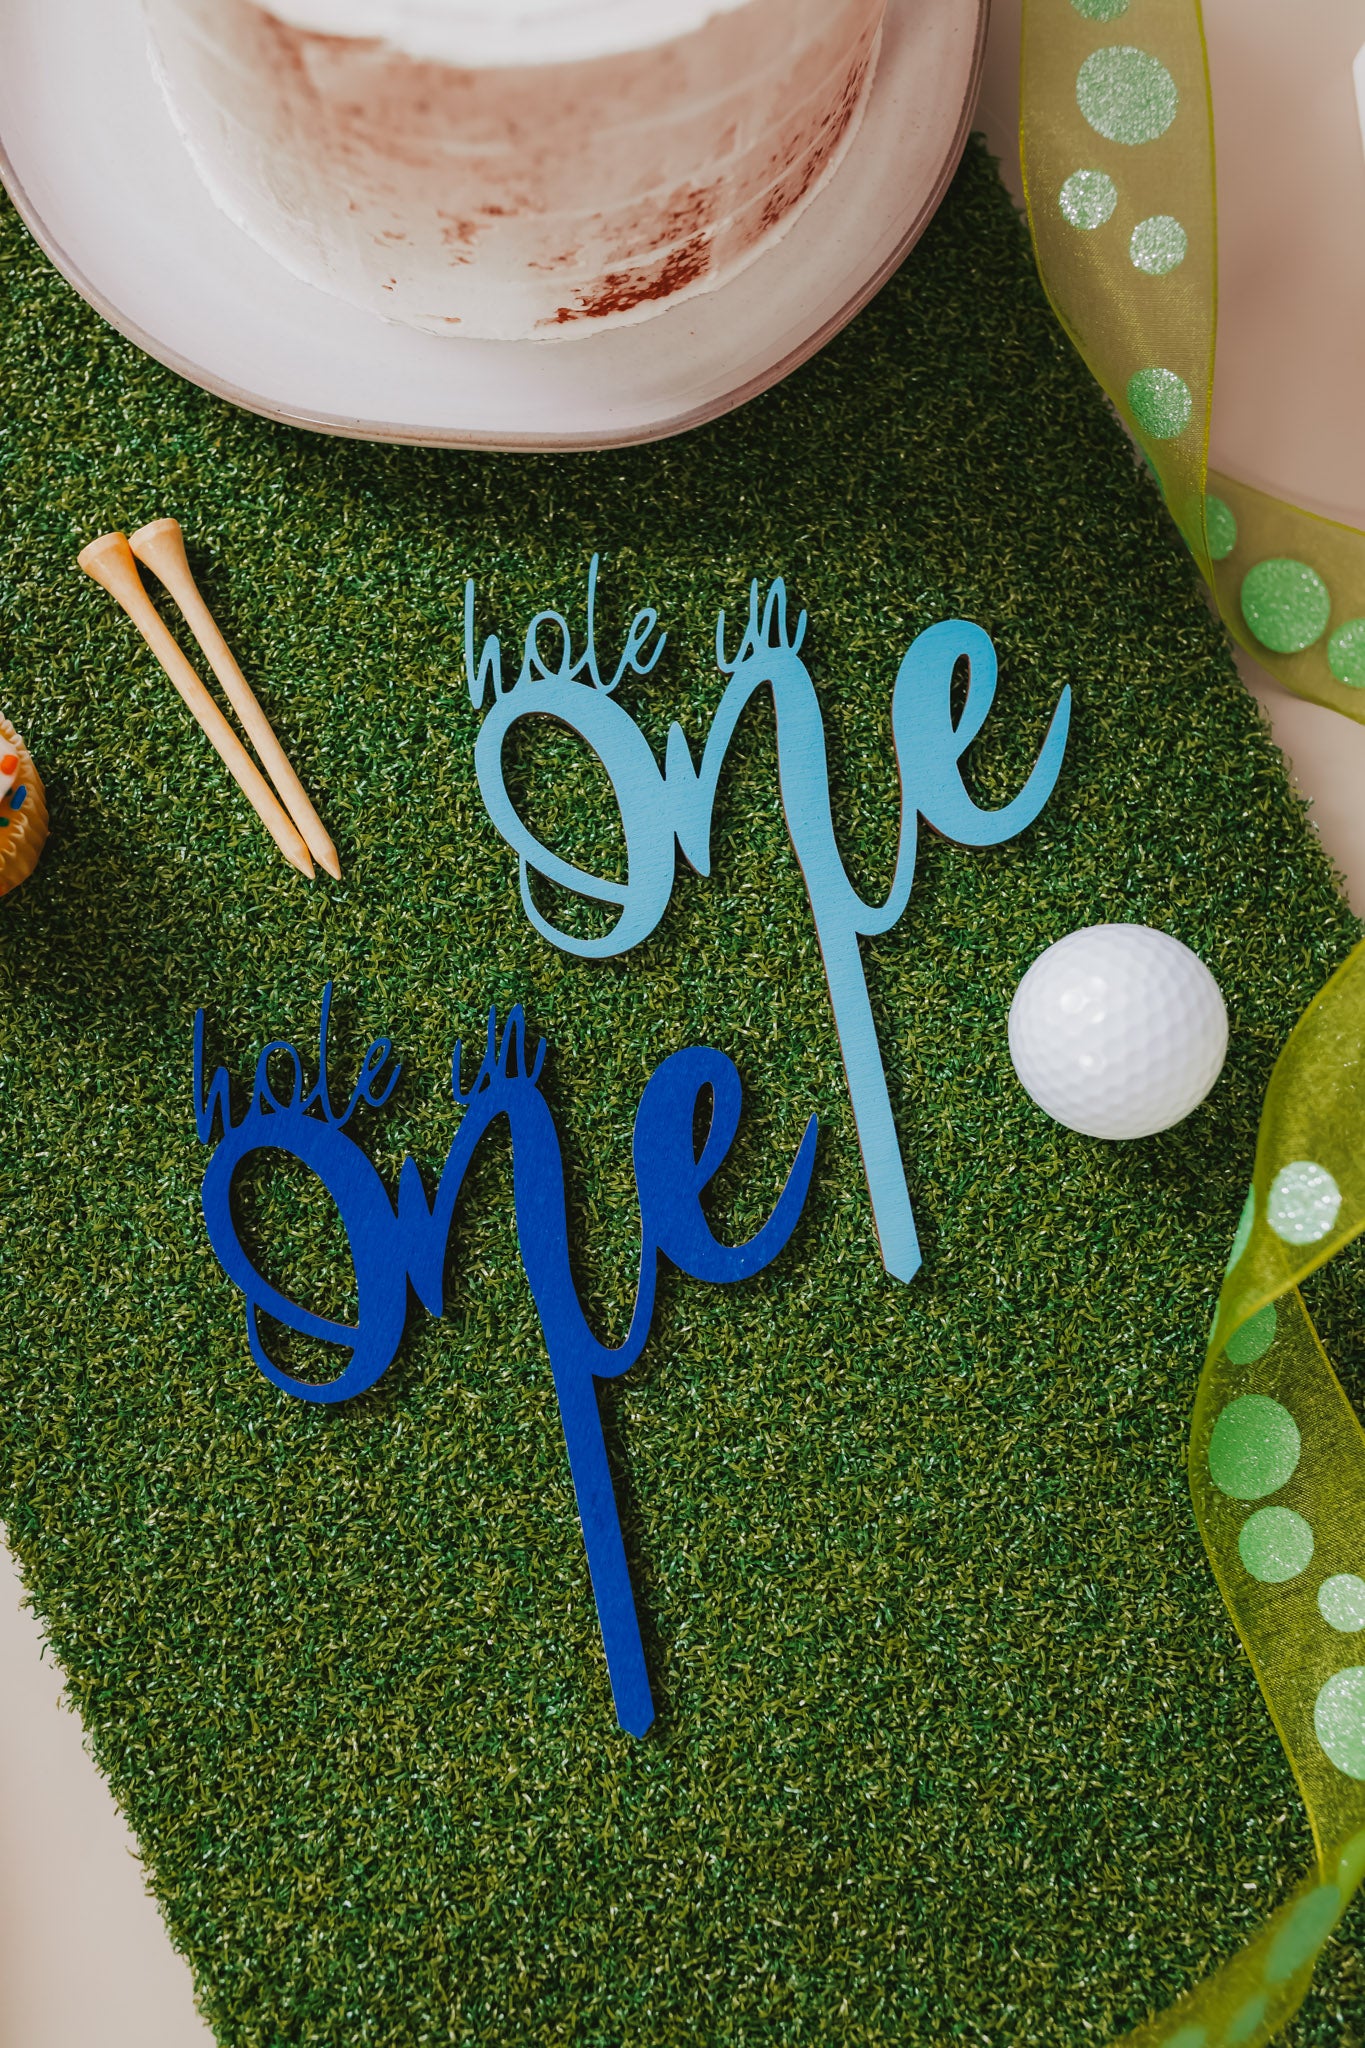 Hole In One Navy Blue Cake Topper For Boys First Golf Birthday, Hole In One Boys Cake Topper For Baby Boy Cake Smash Photoshoot